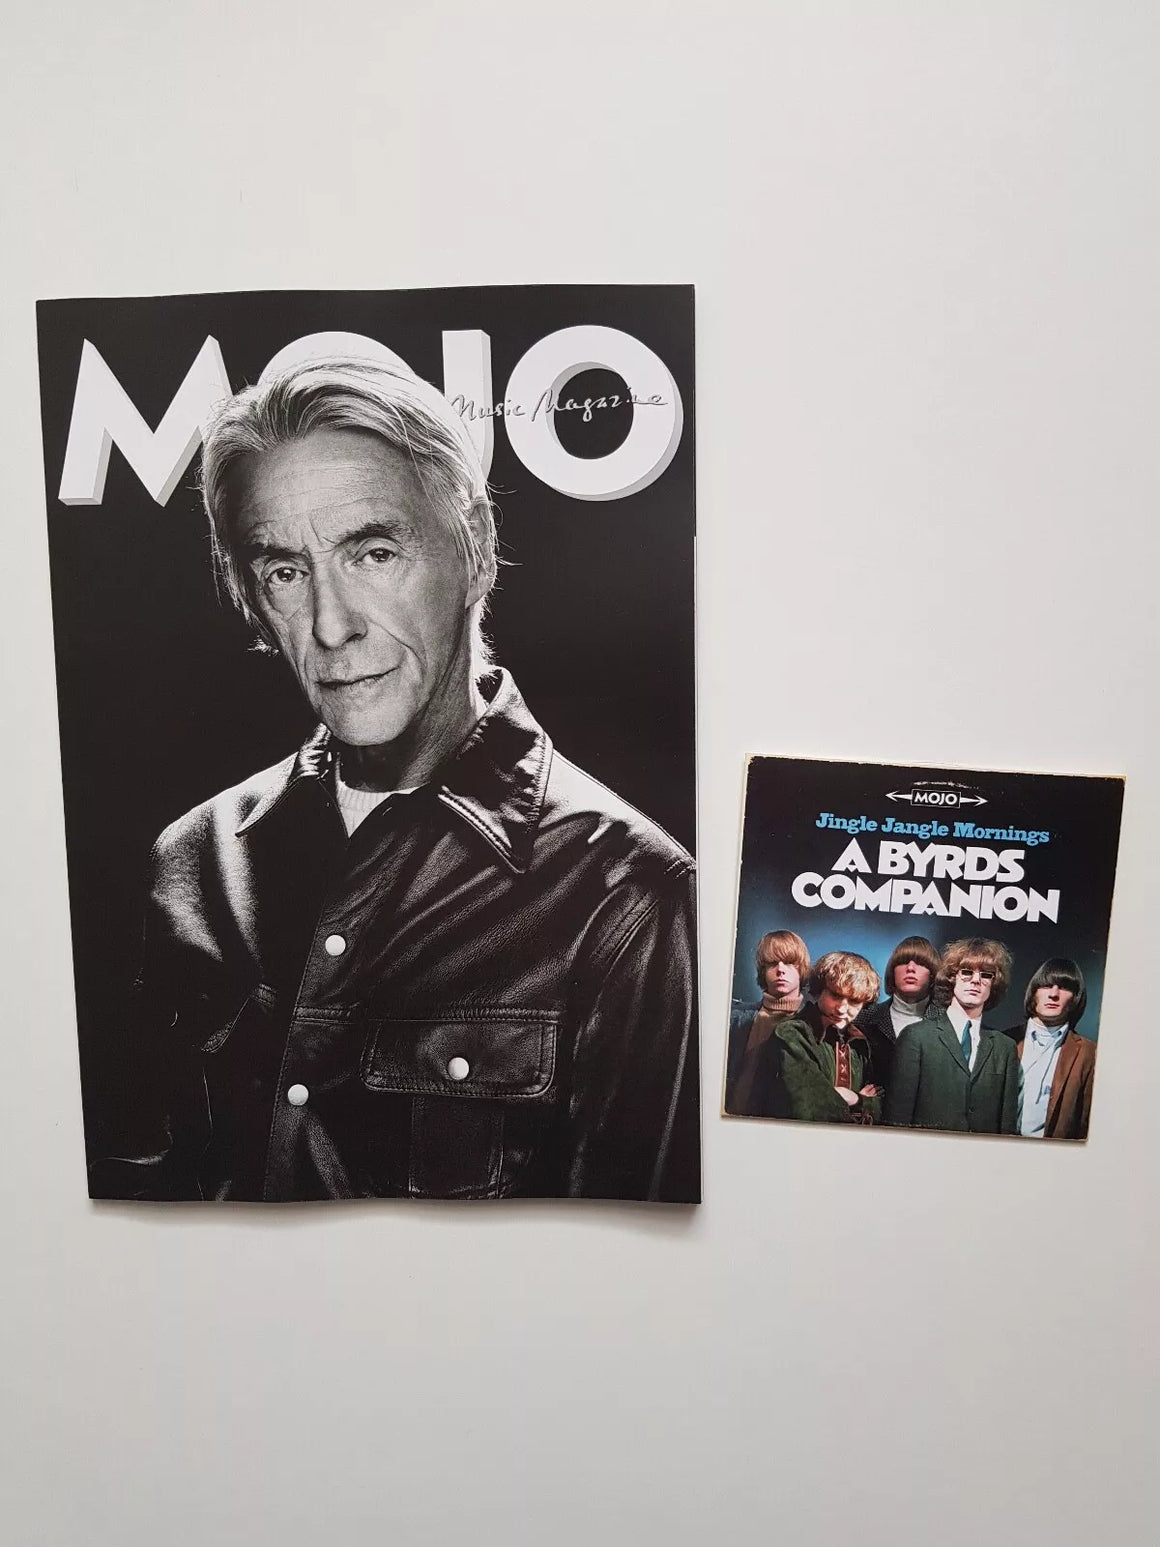 MOJO 368 – July 2024: Paul Weller Subscribers Cover & Free A Byrds Companion CD